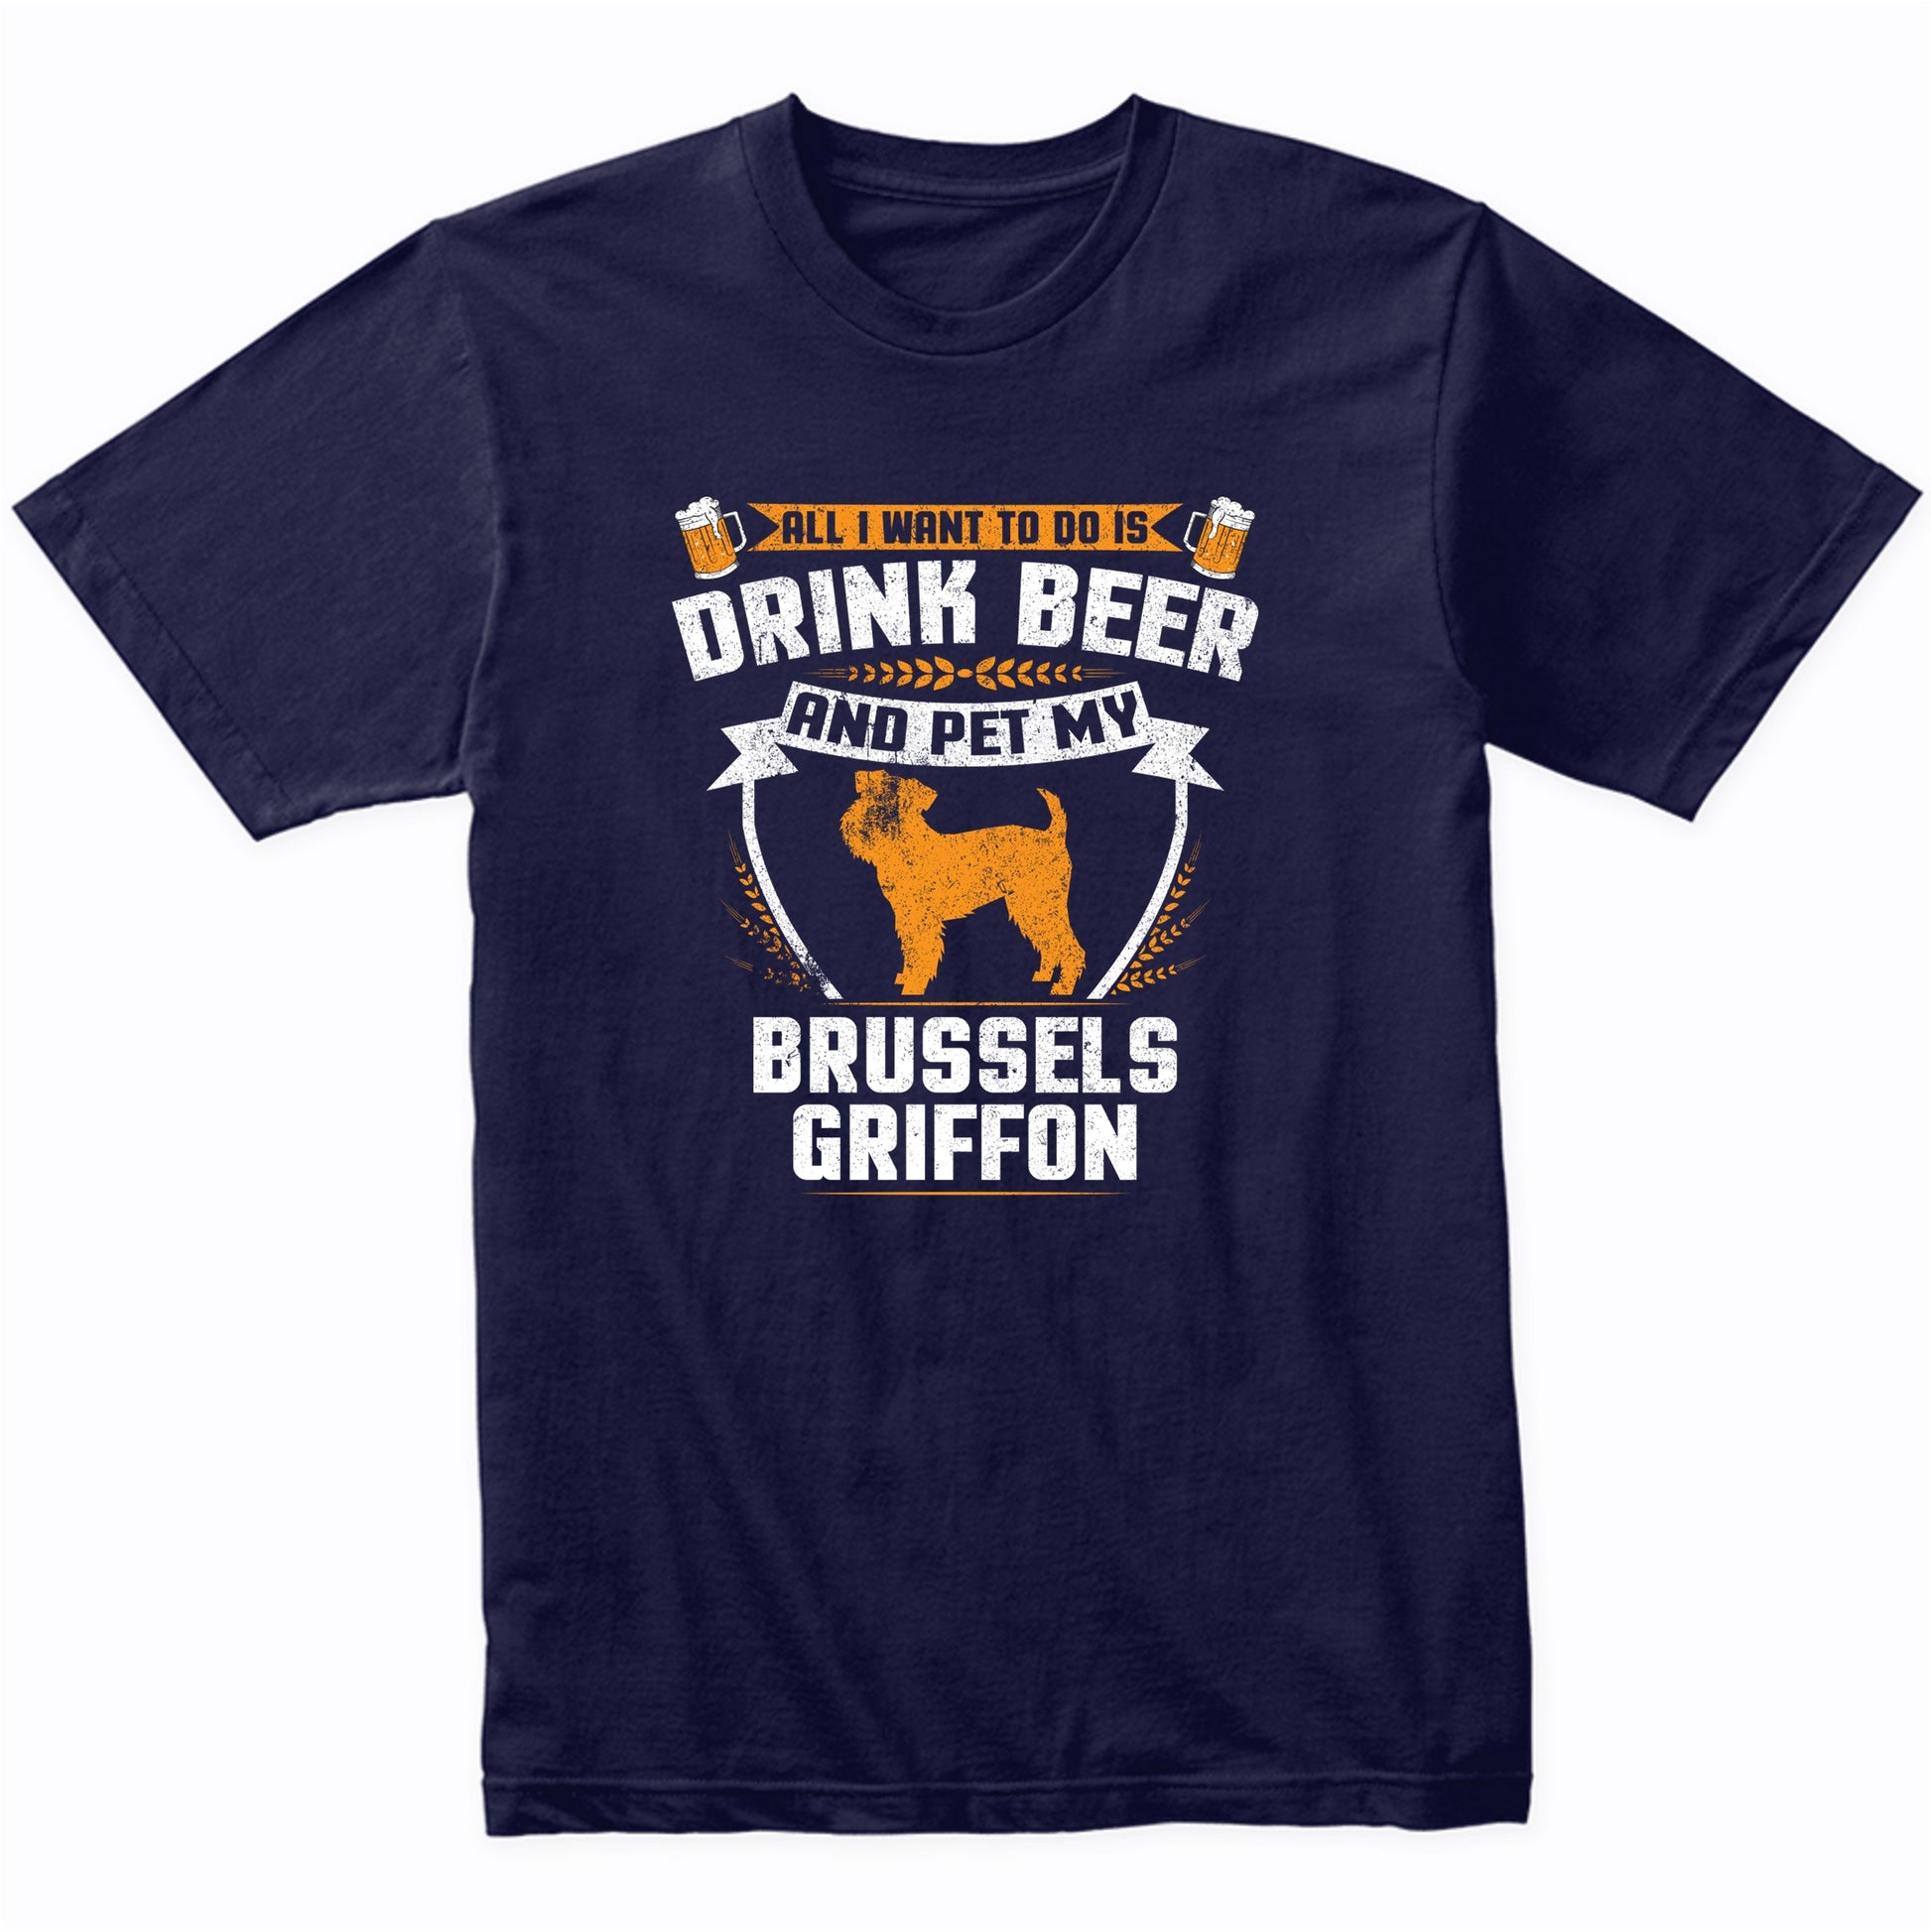 All I Want To Do Is Drink Beer And Pet My Brussels Griffon Funny Dog Owner Shirt